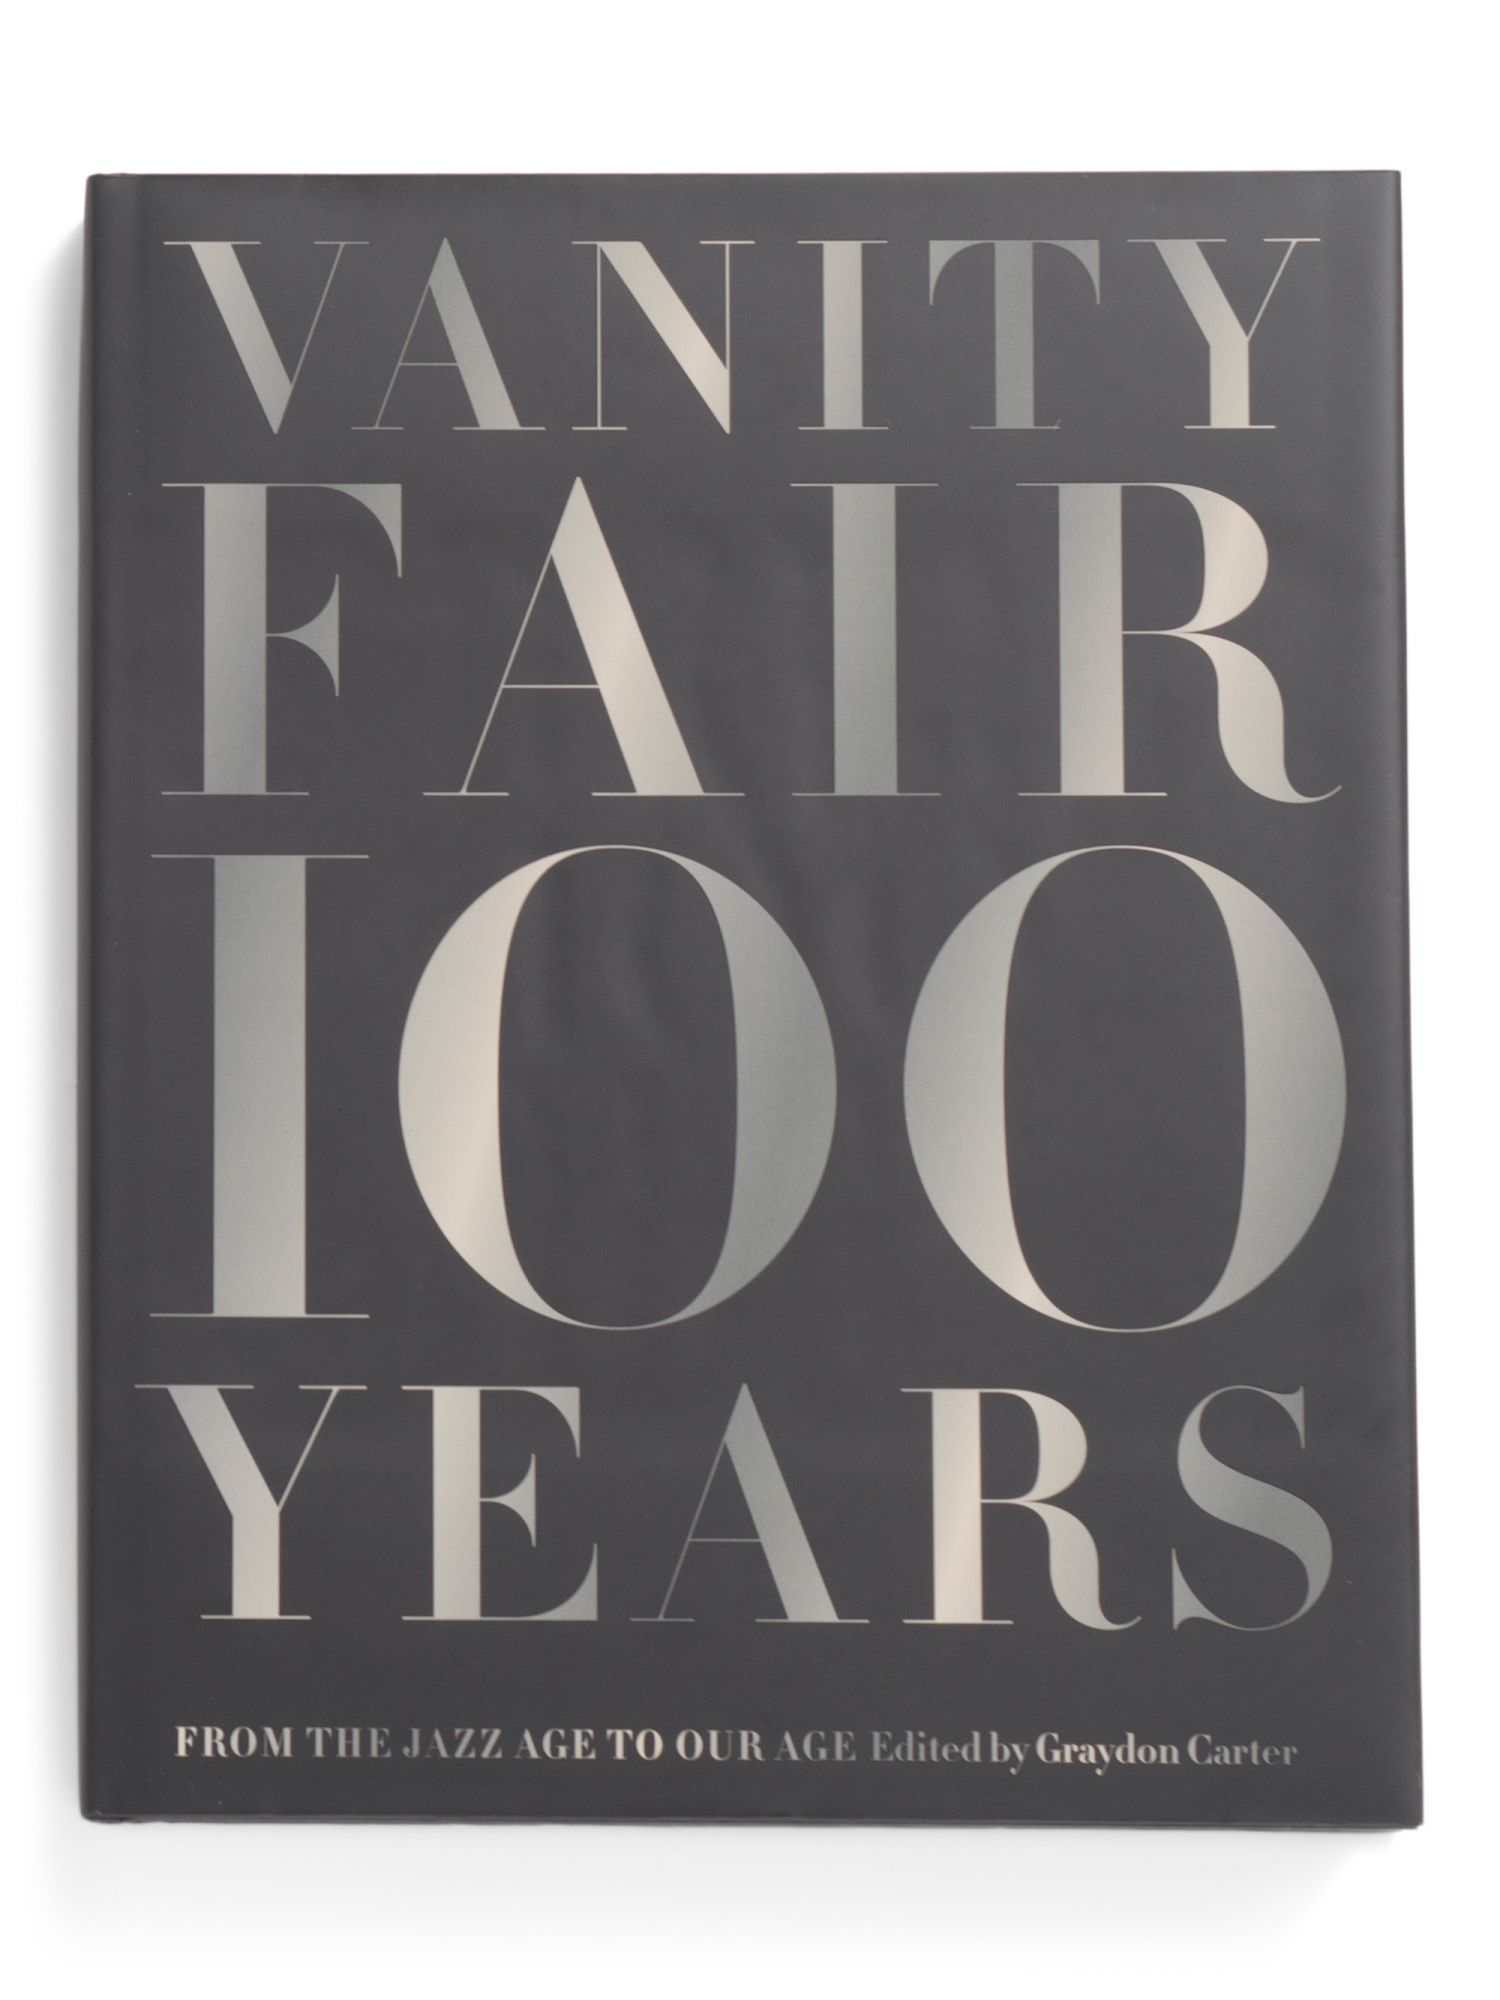 Vanity Fair 100 Years From The Jazz Age To Our Age Book | Pillows & Decor | Marshalls | Marshalls